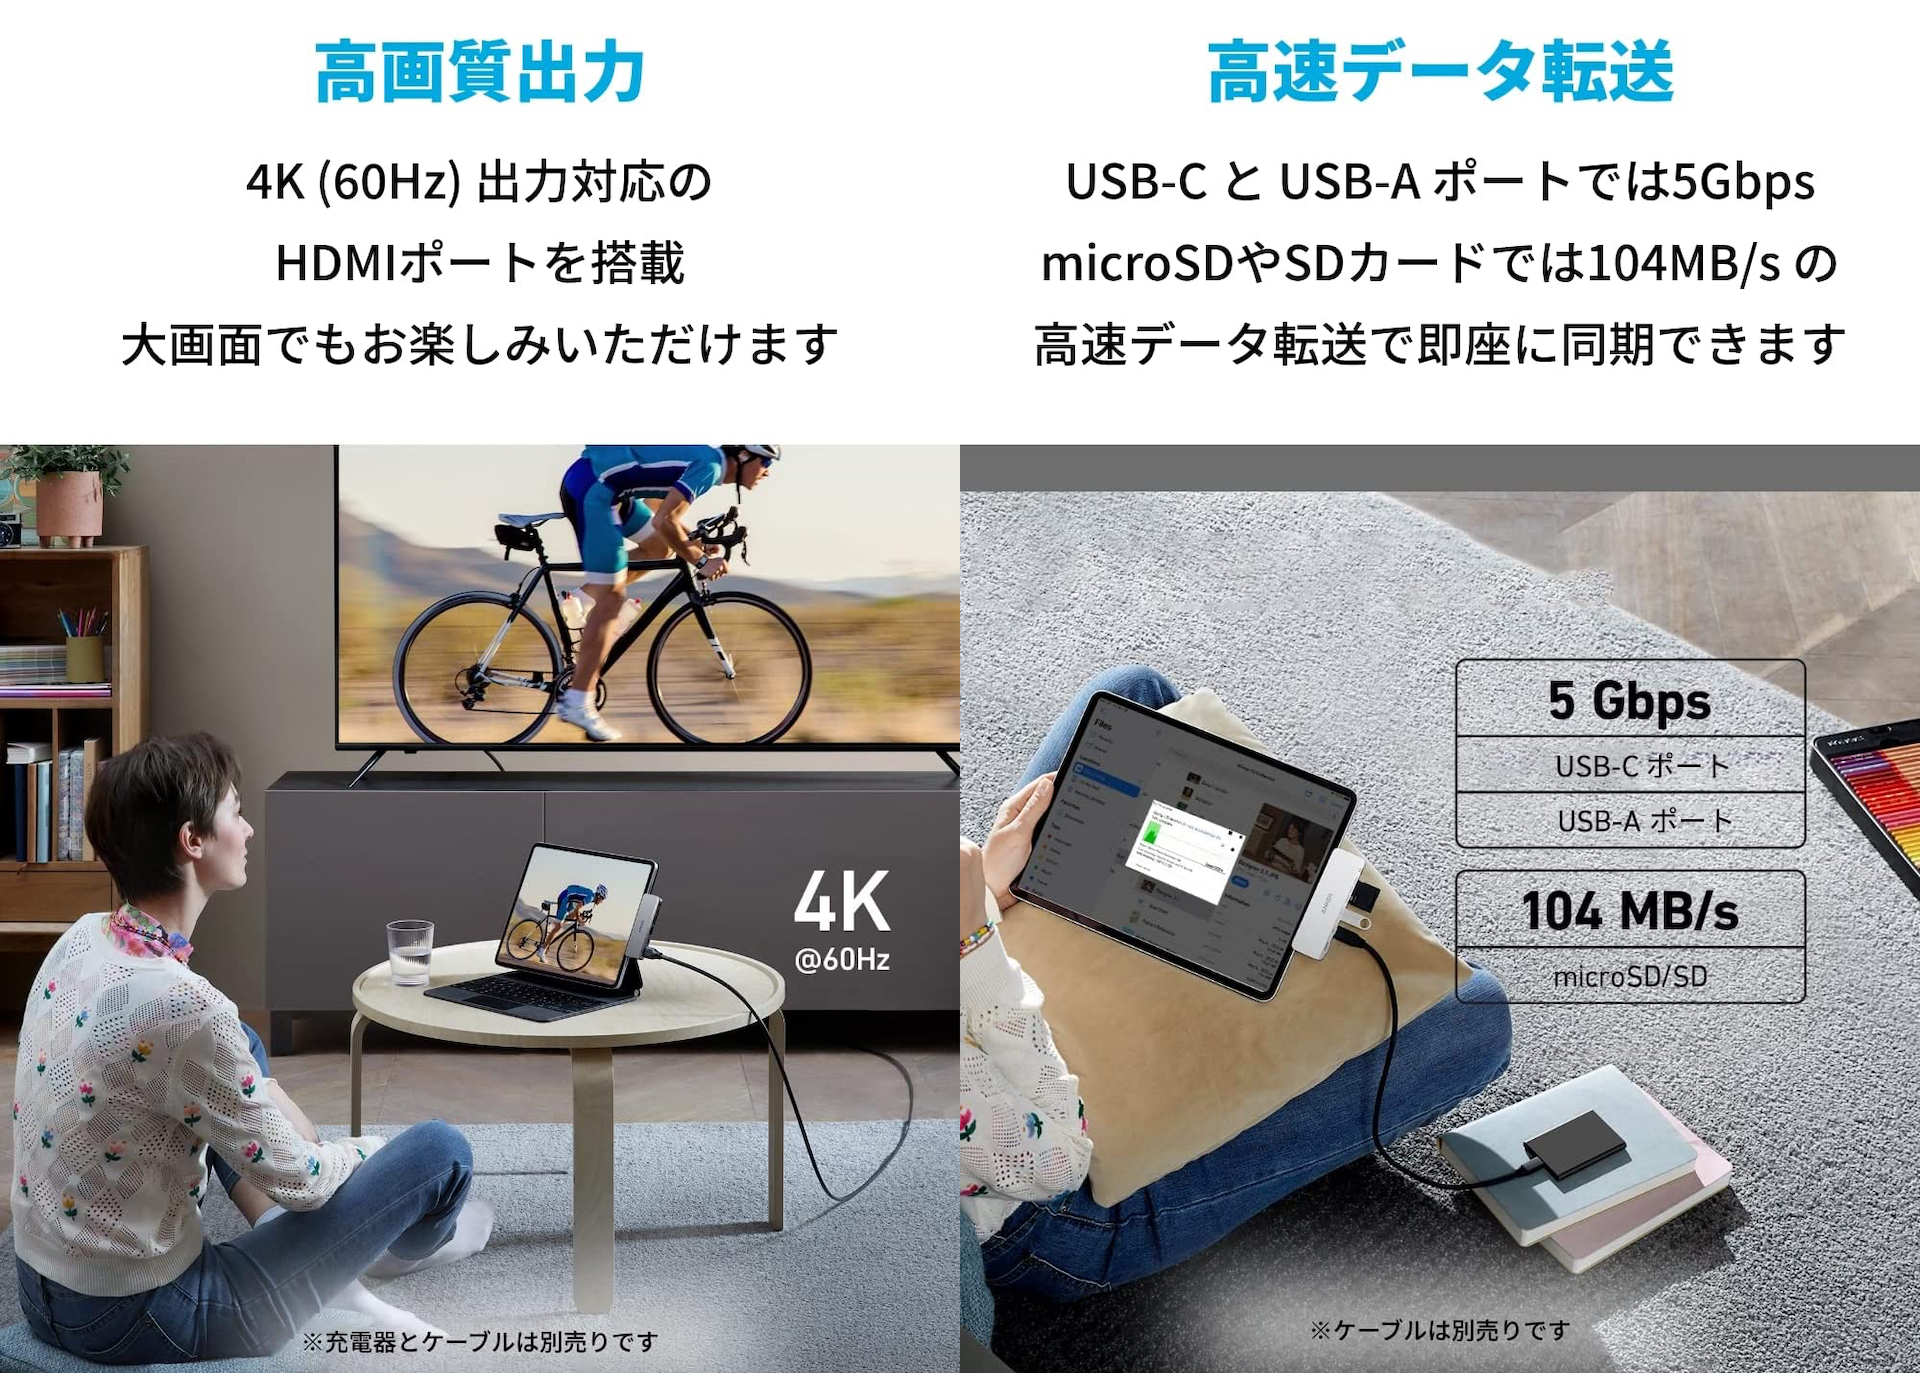 Anker 541 USB-C ハブ（6-in-1, for iPad）